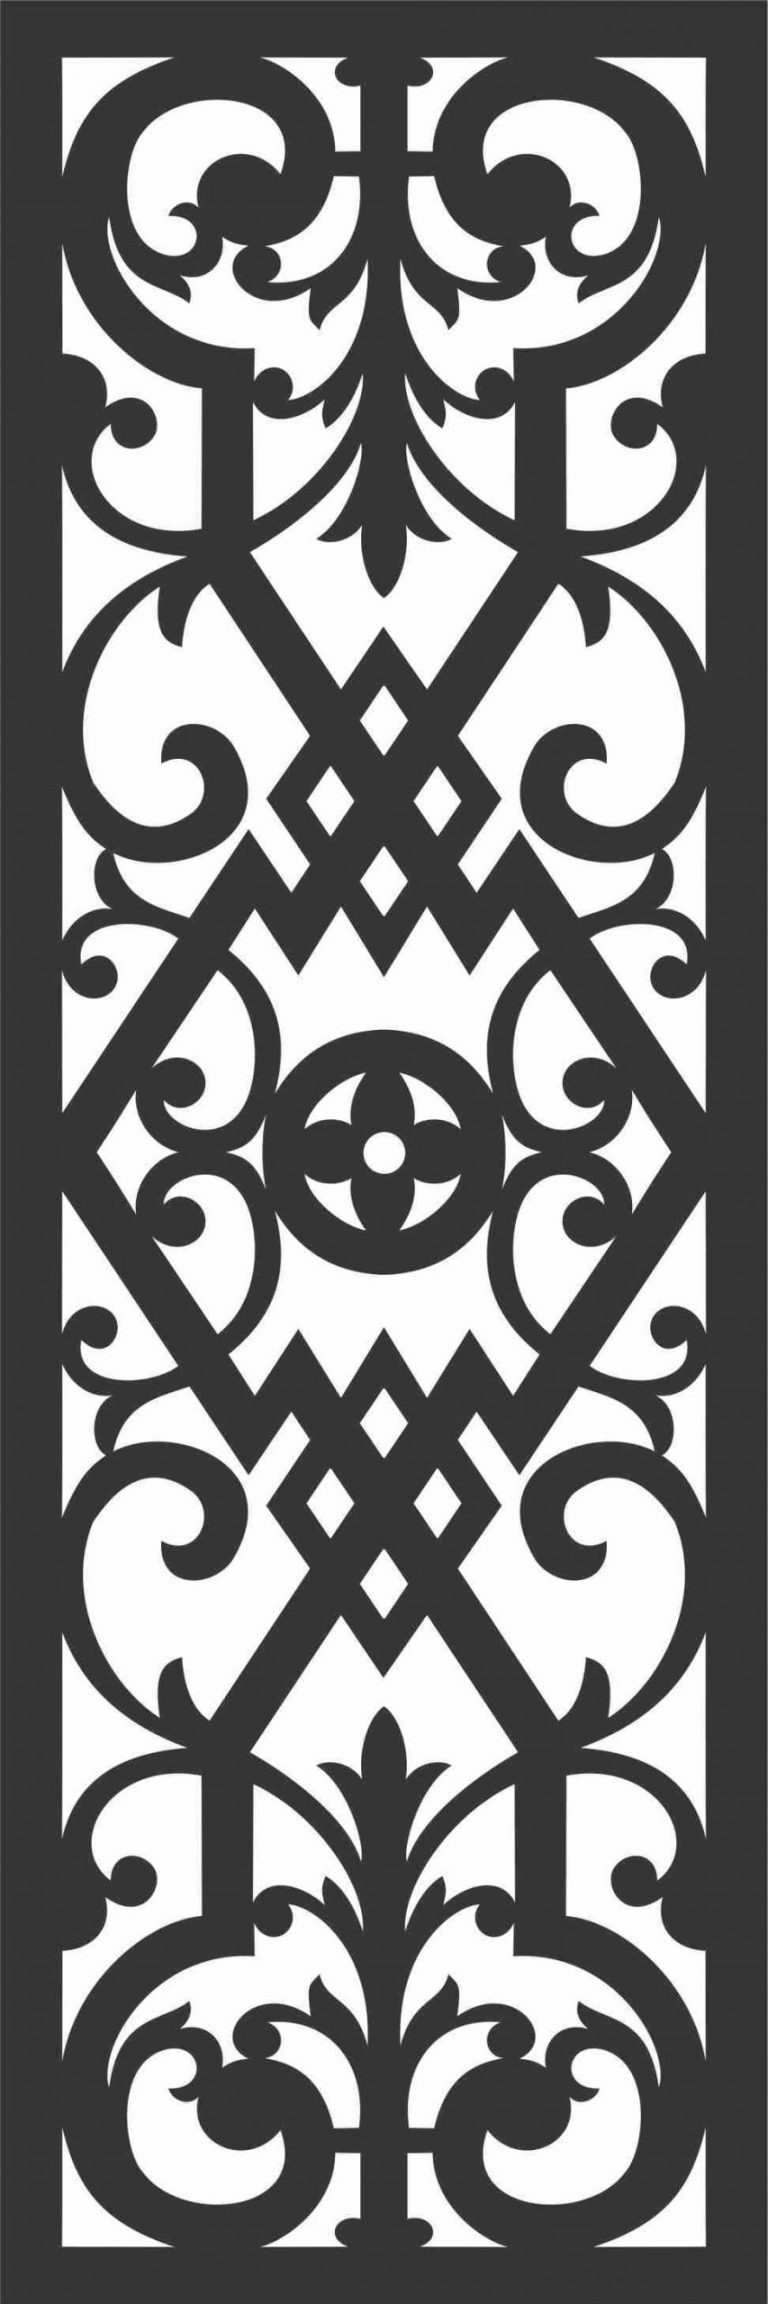 Floral Screen Patterns Design 92 Free DXF File